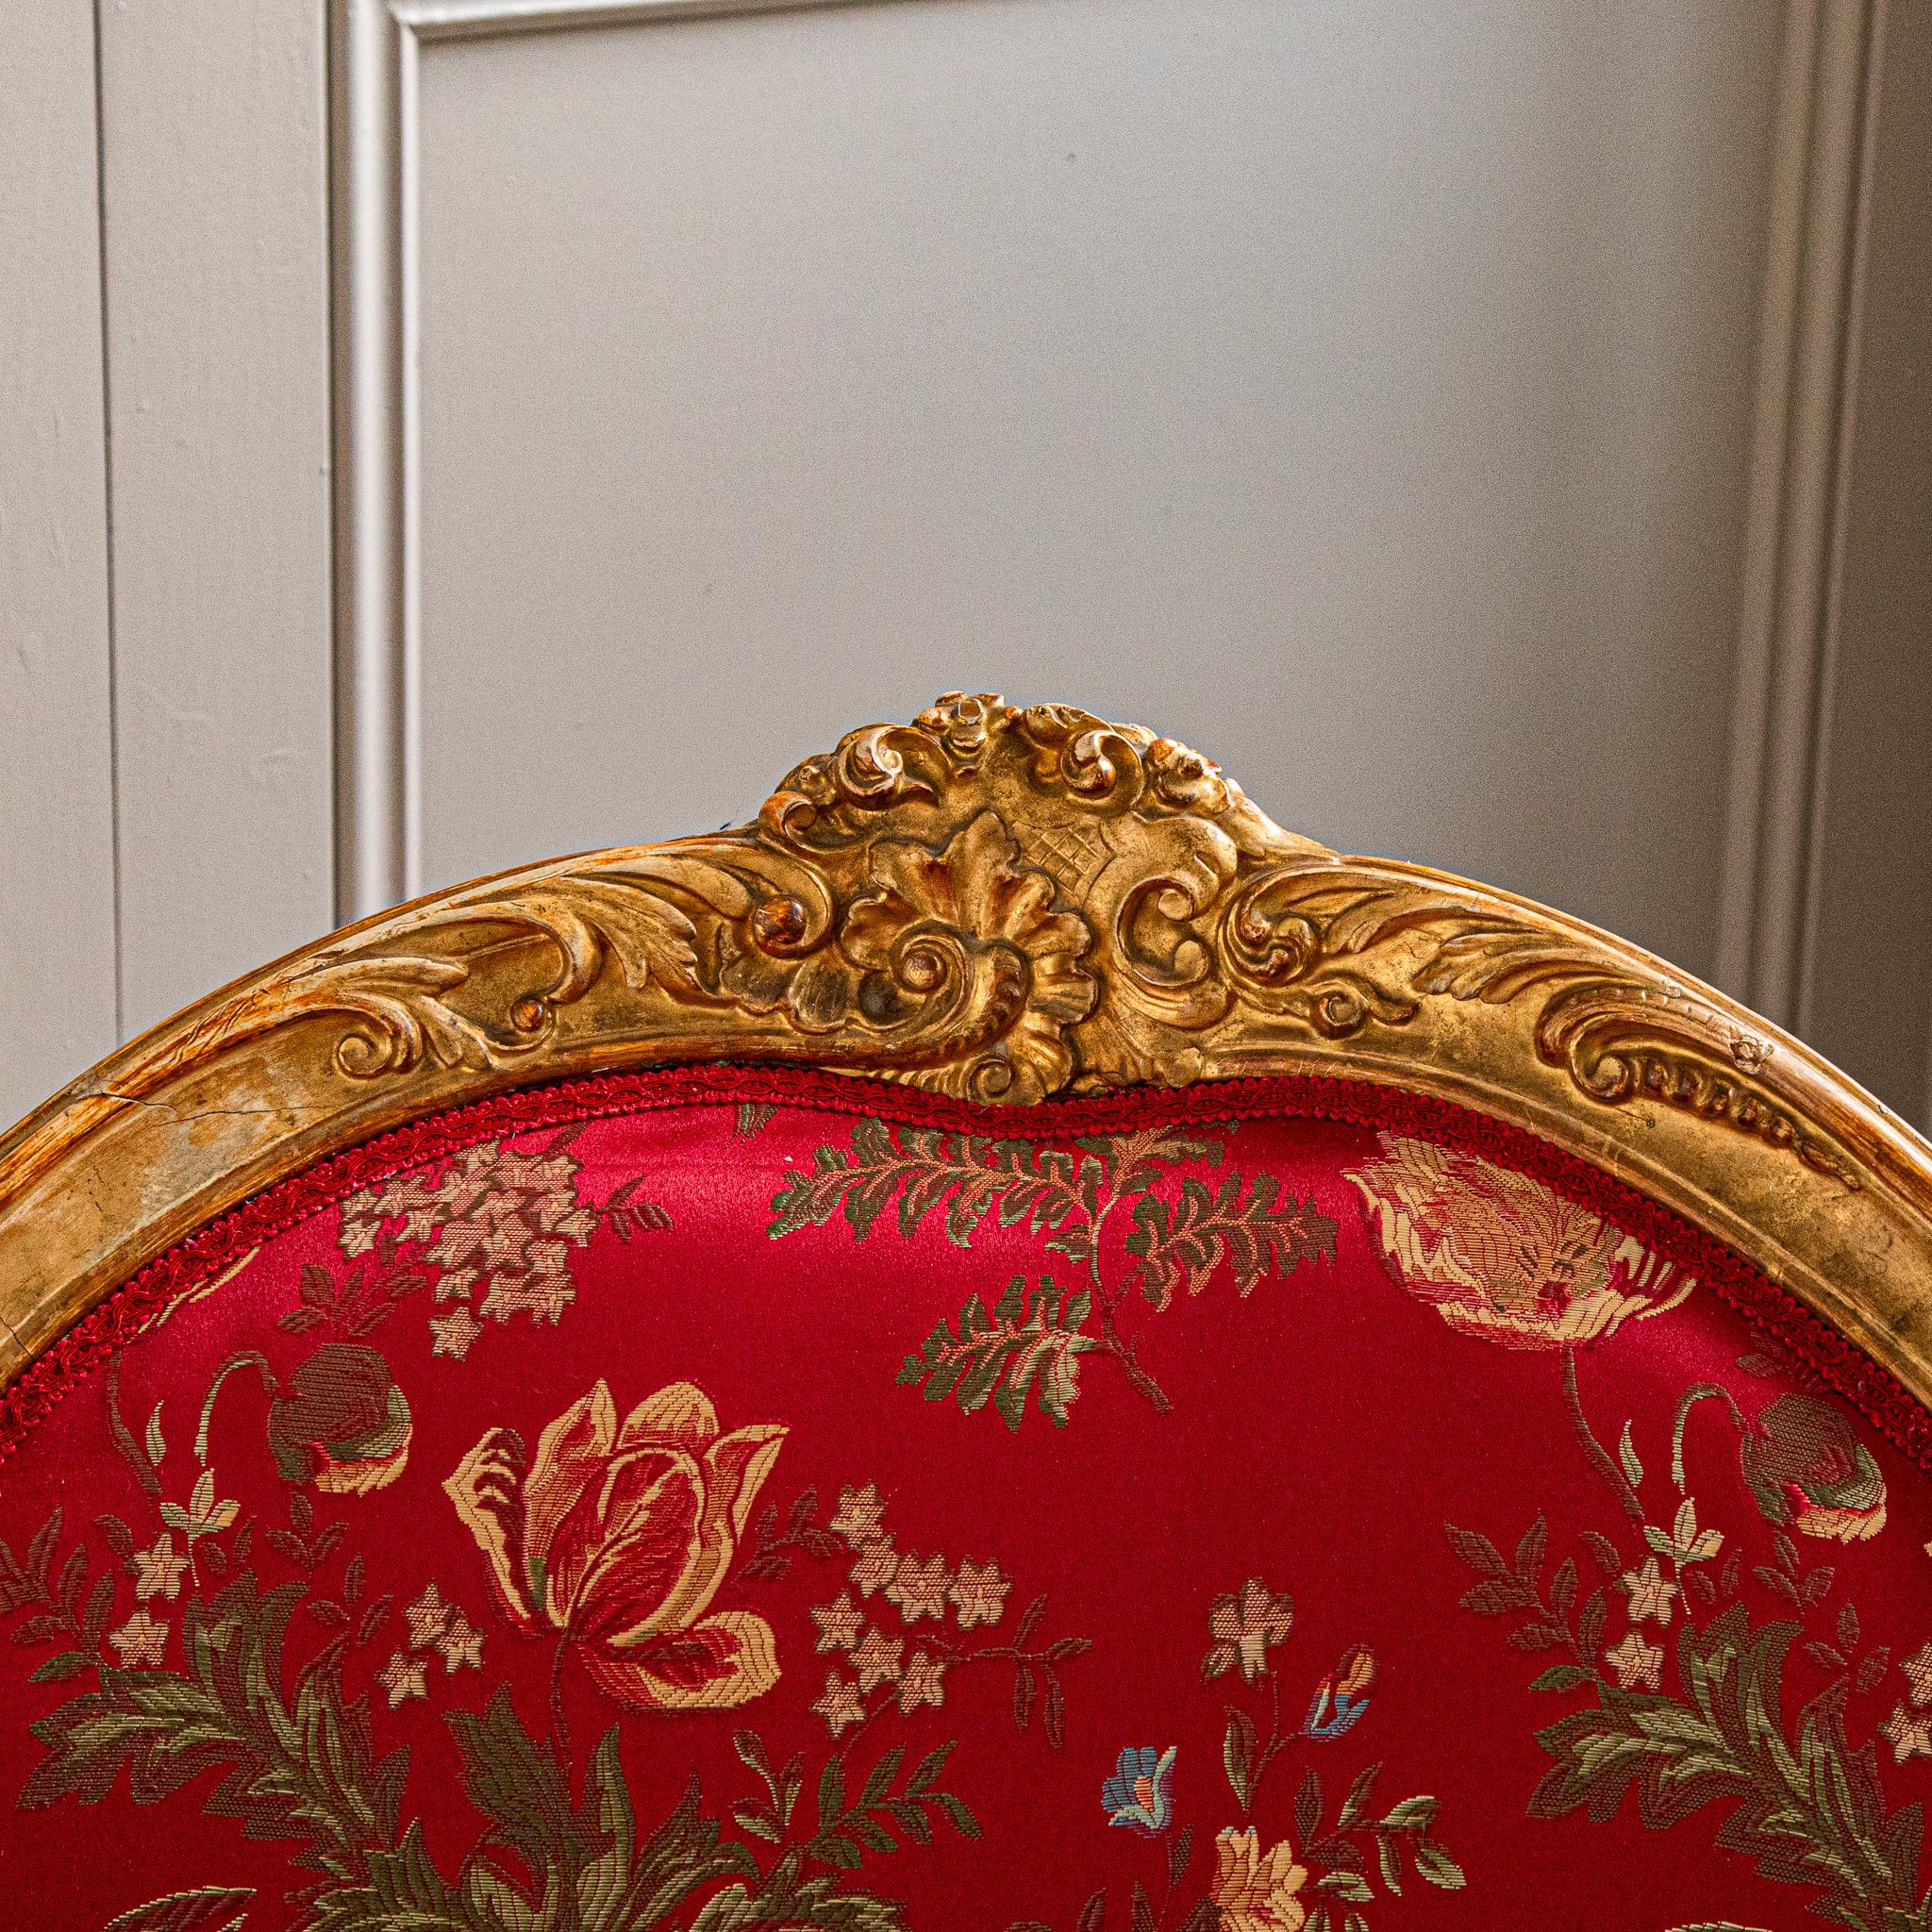 Circa 1880 Italian Giltwood LXV Style Chaise Longue For Sale 3